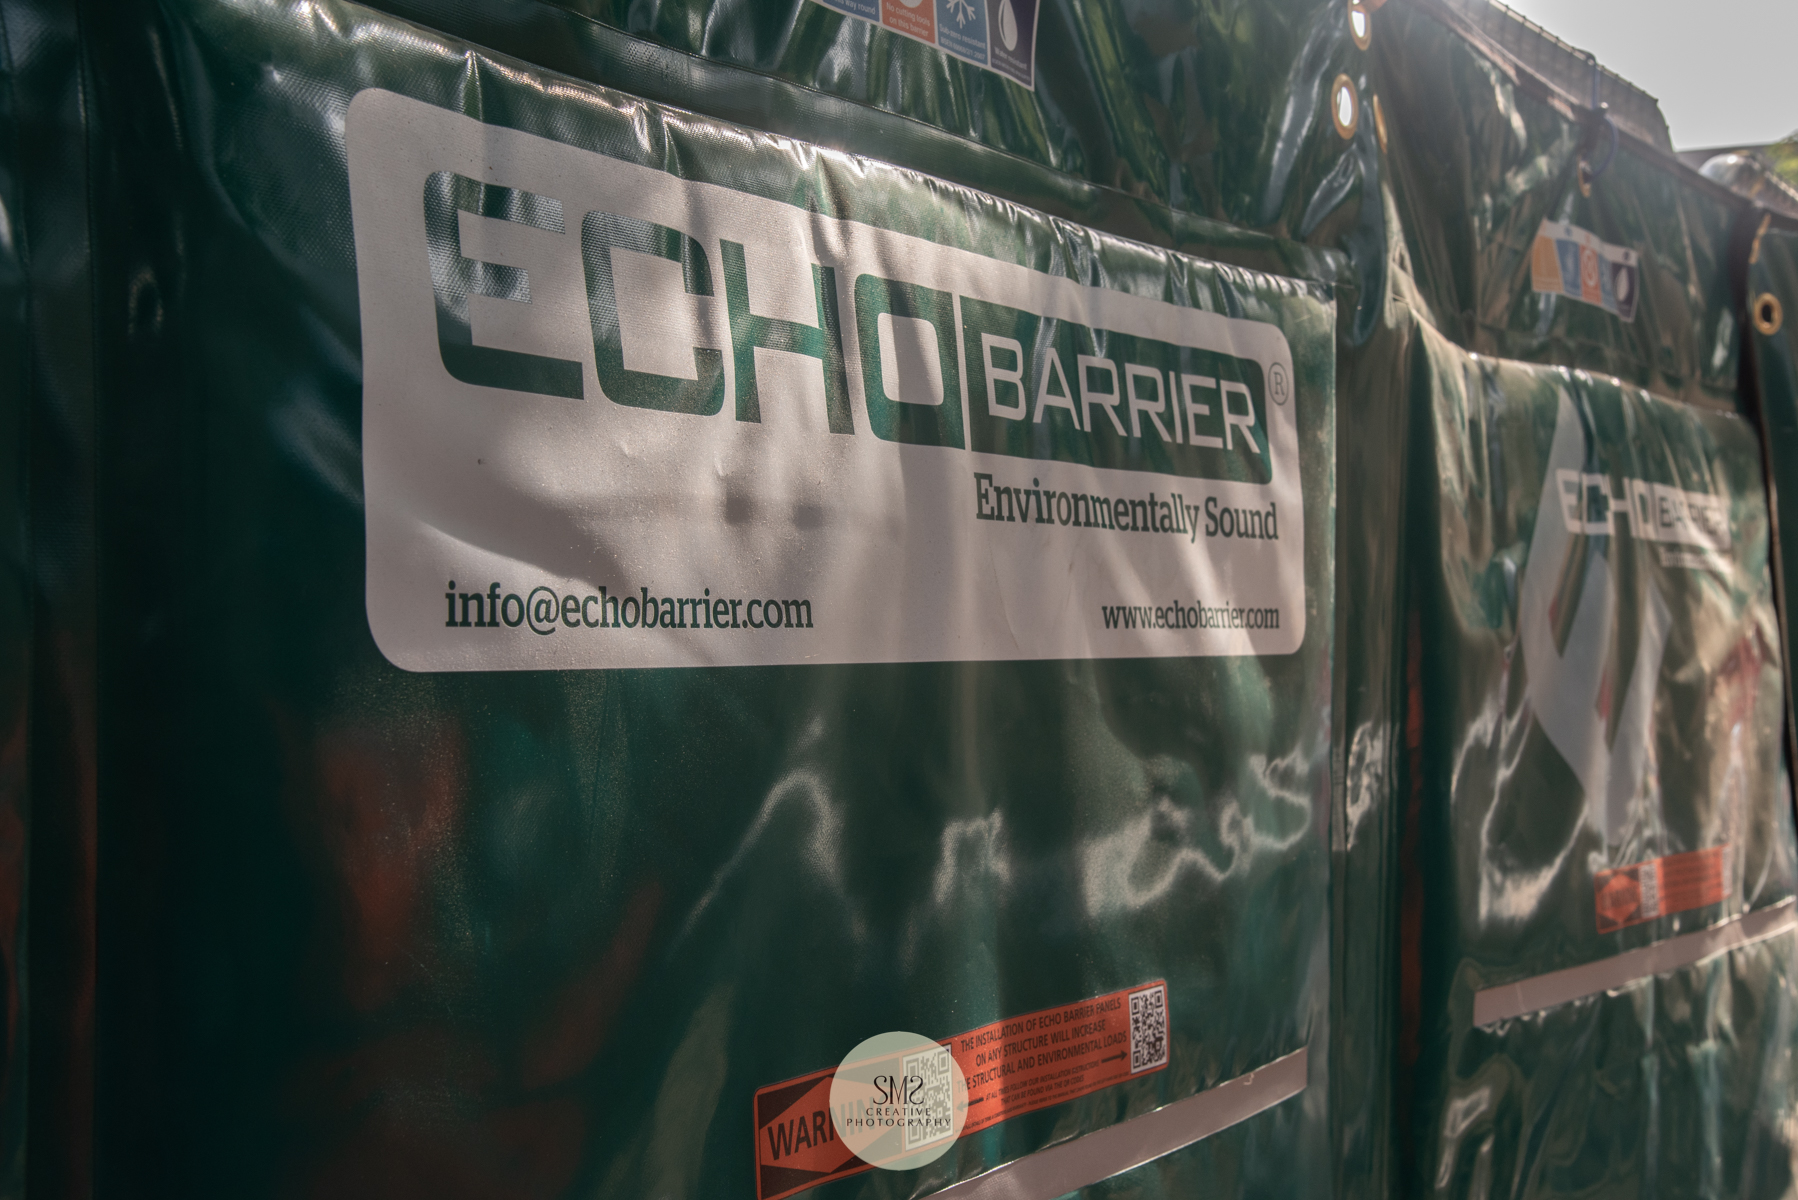  An ‘echo barrier’ to reduce the noise levels 